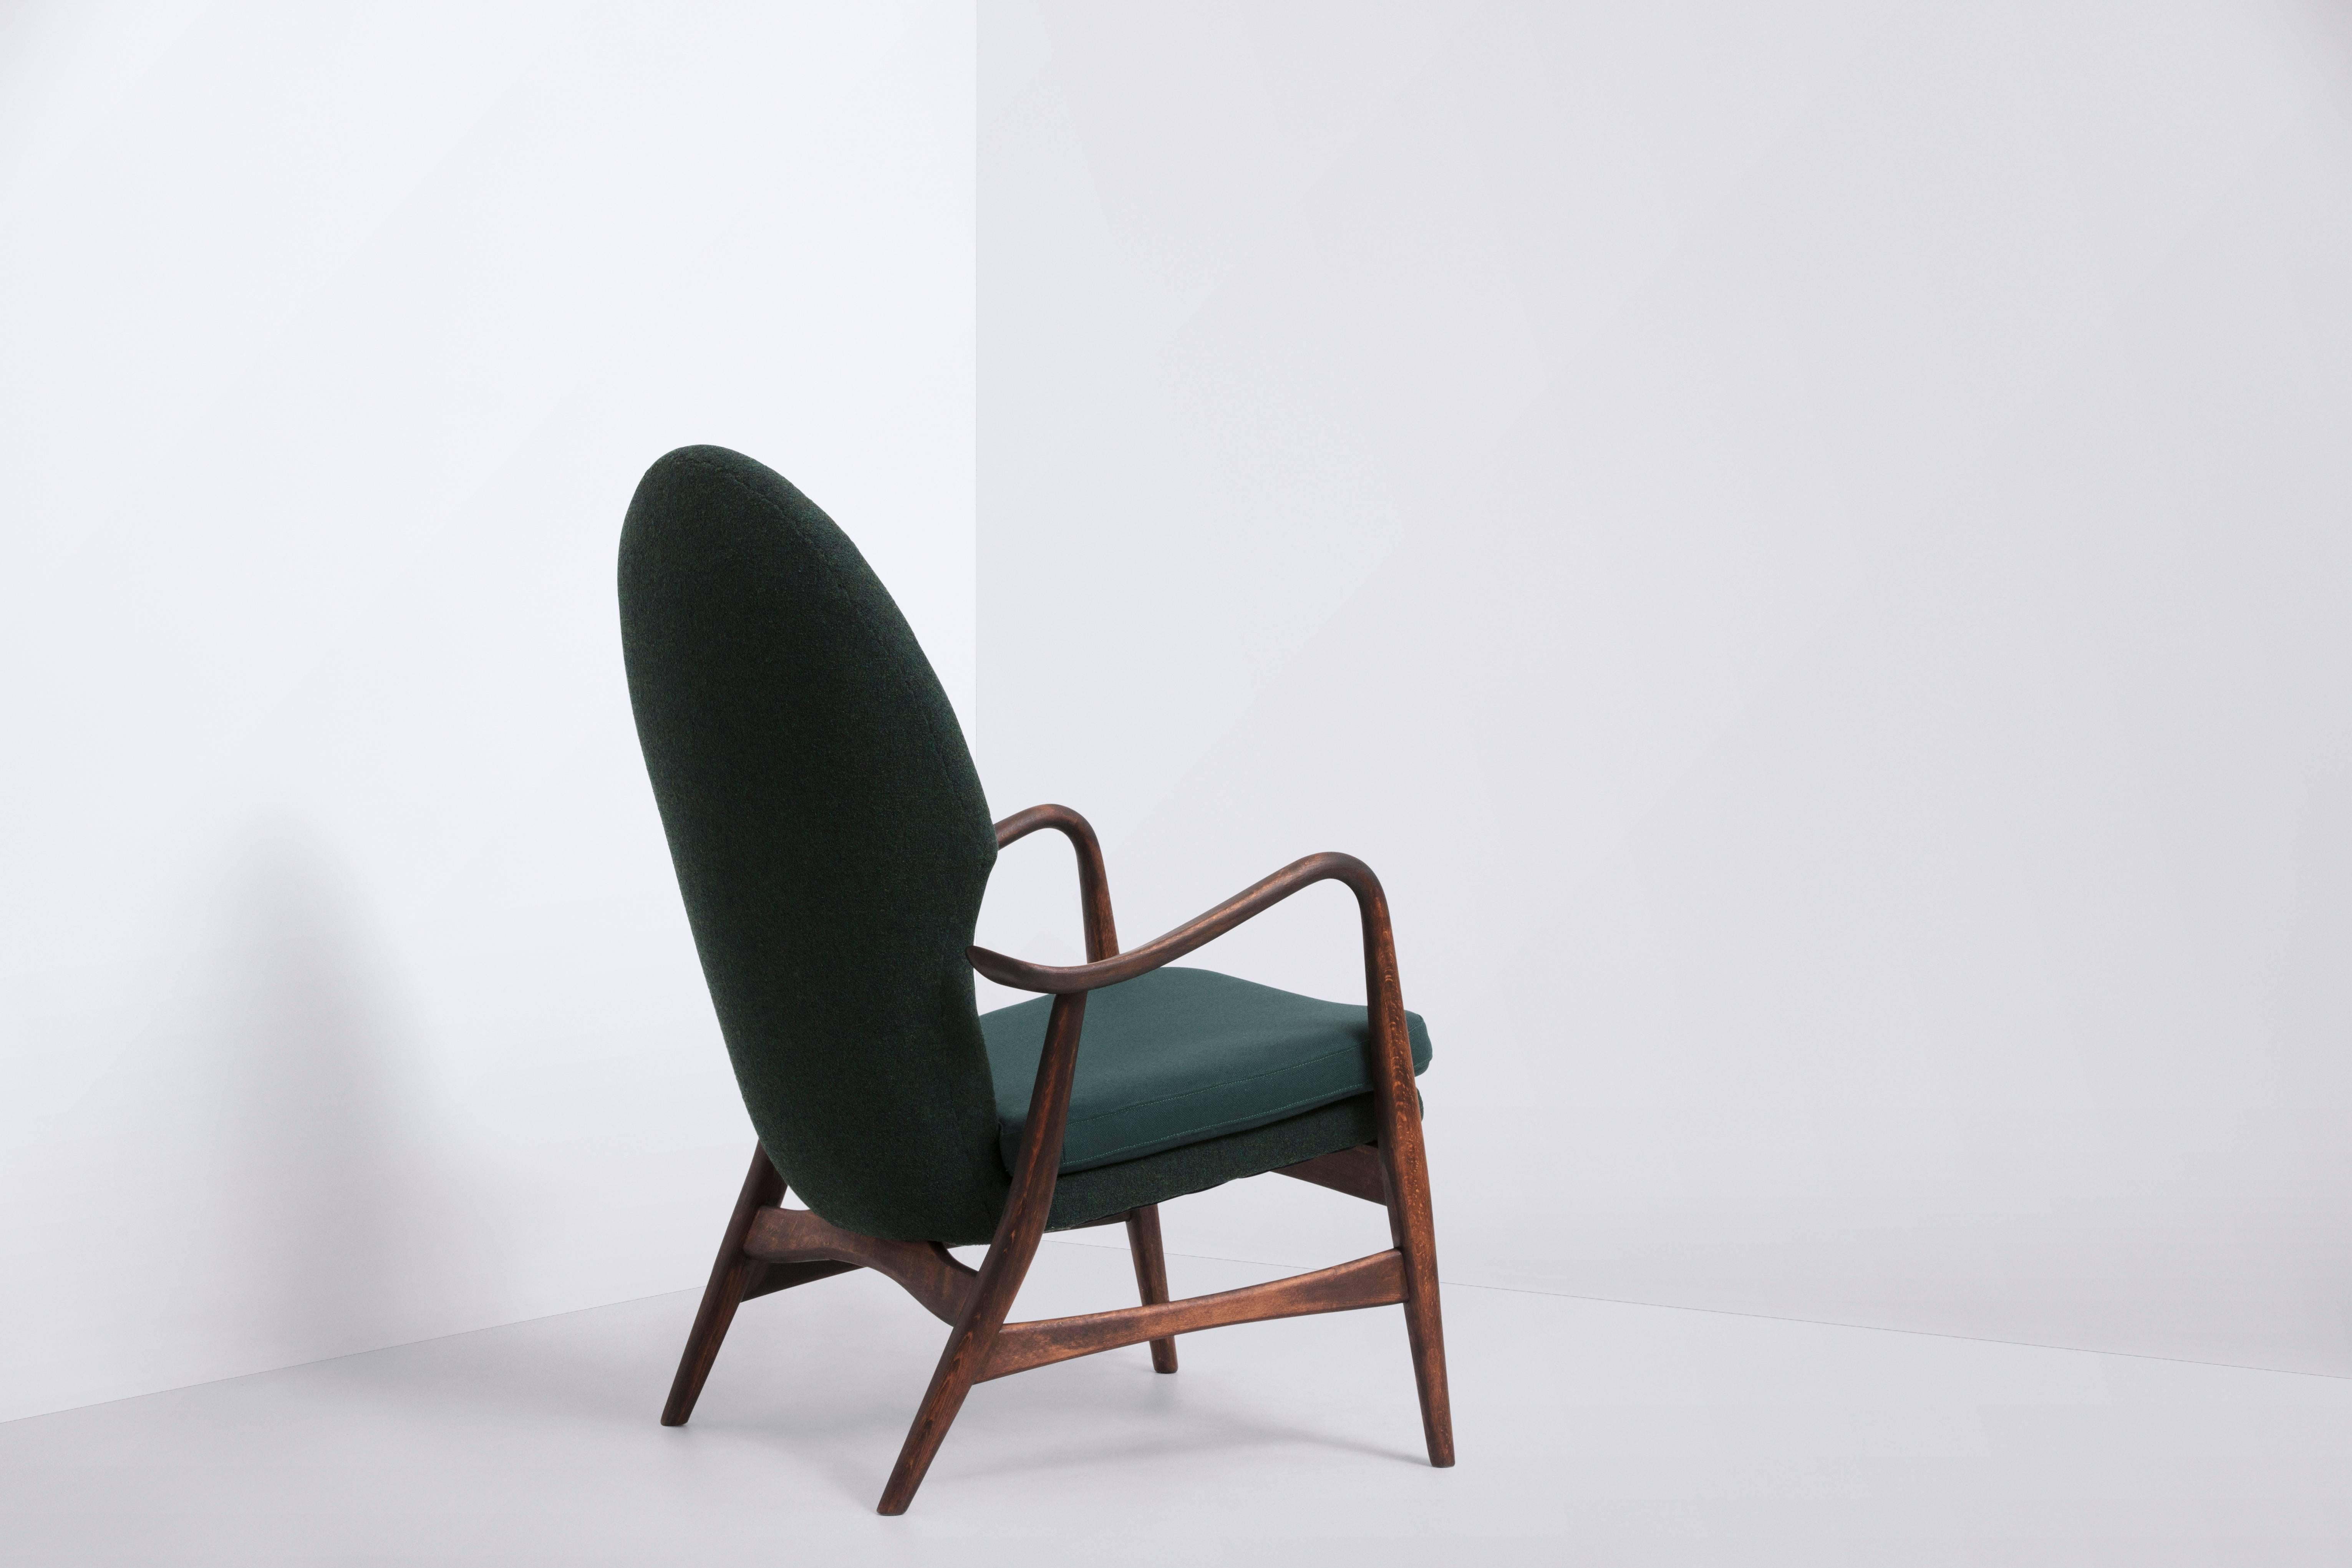 Produced by Slagelse Møbelværk
Frame of stained beech
Green wool upholstery by Kvadrat.
 